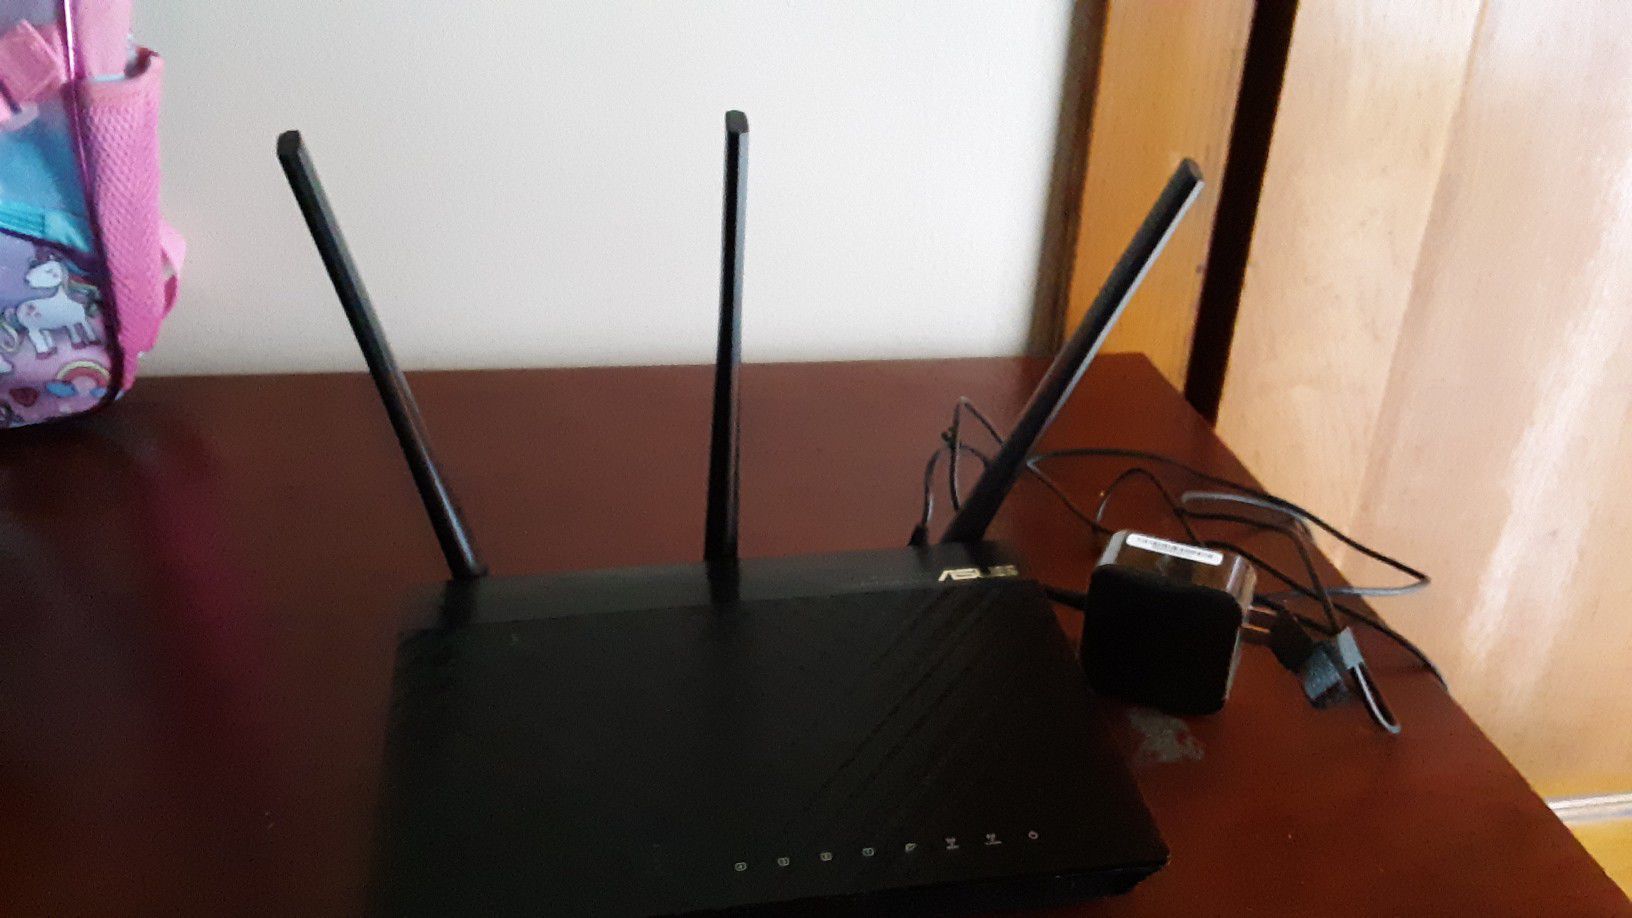 Asus ac1750 router.